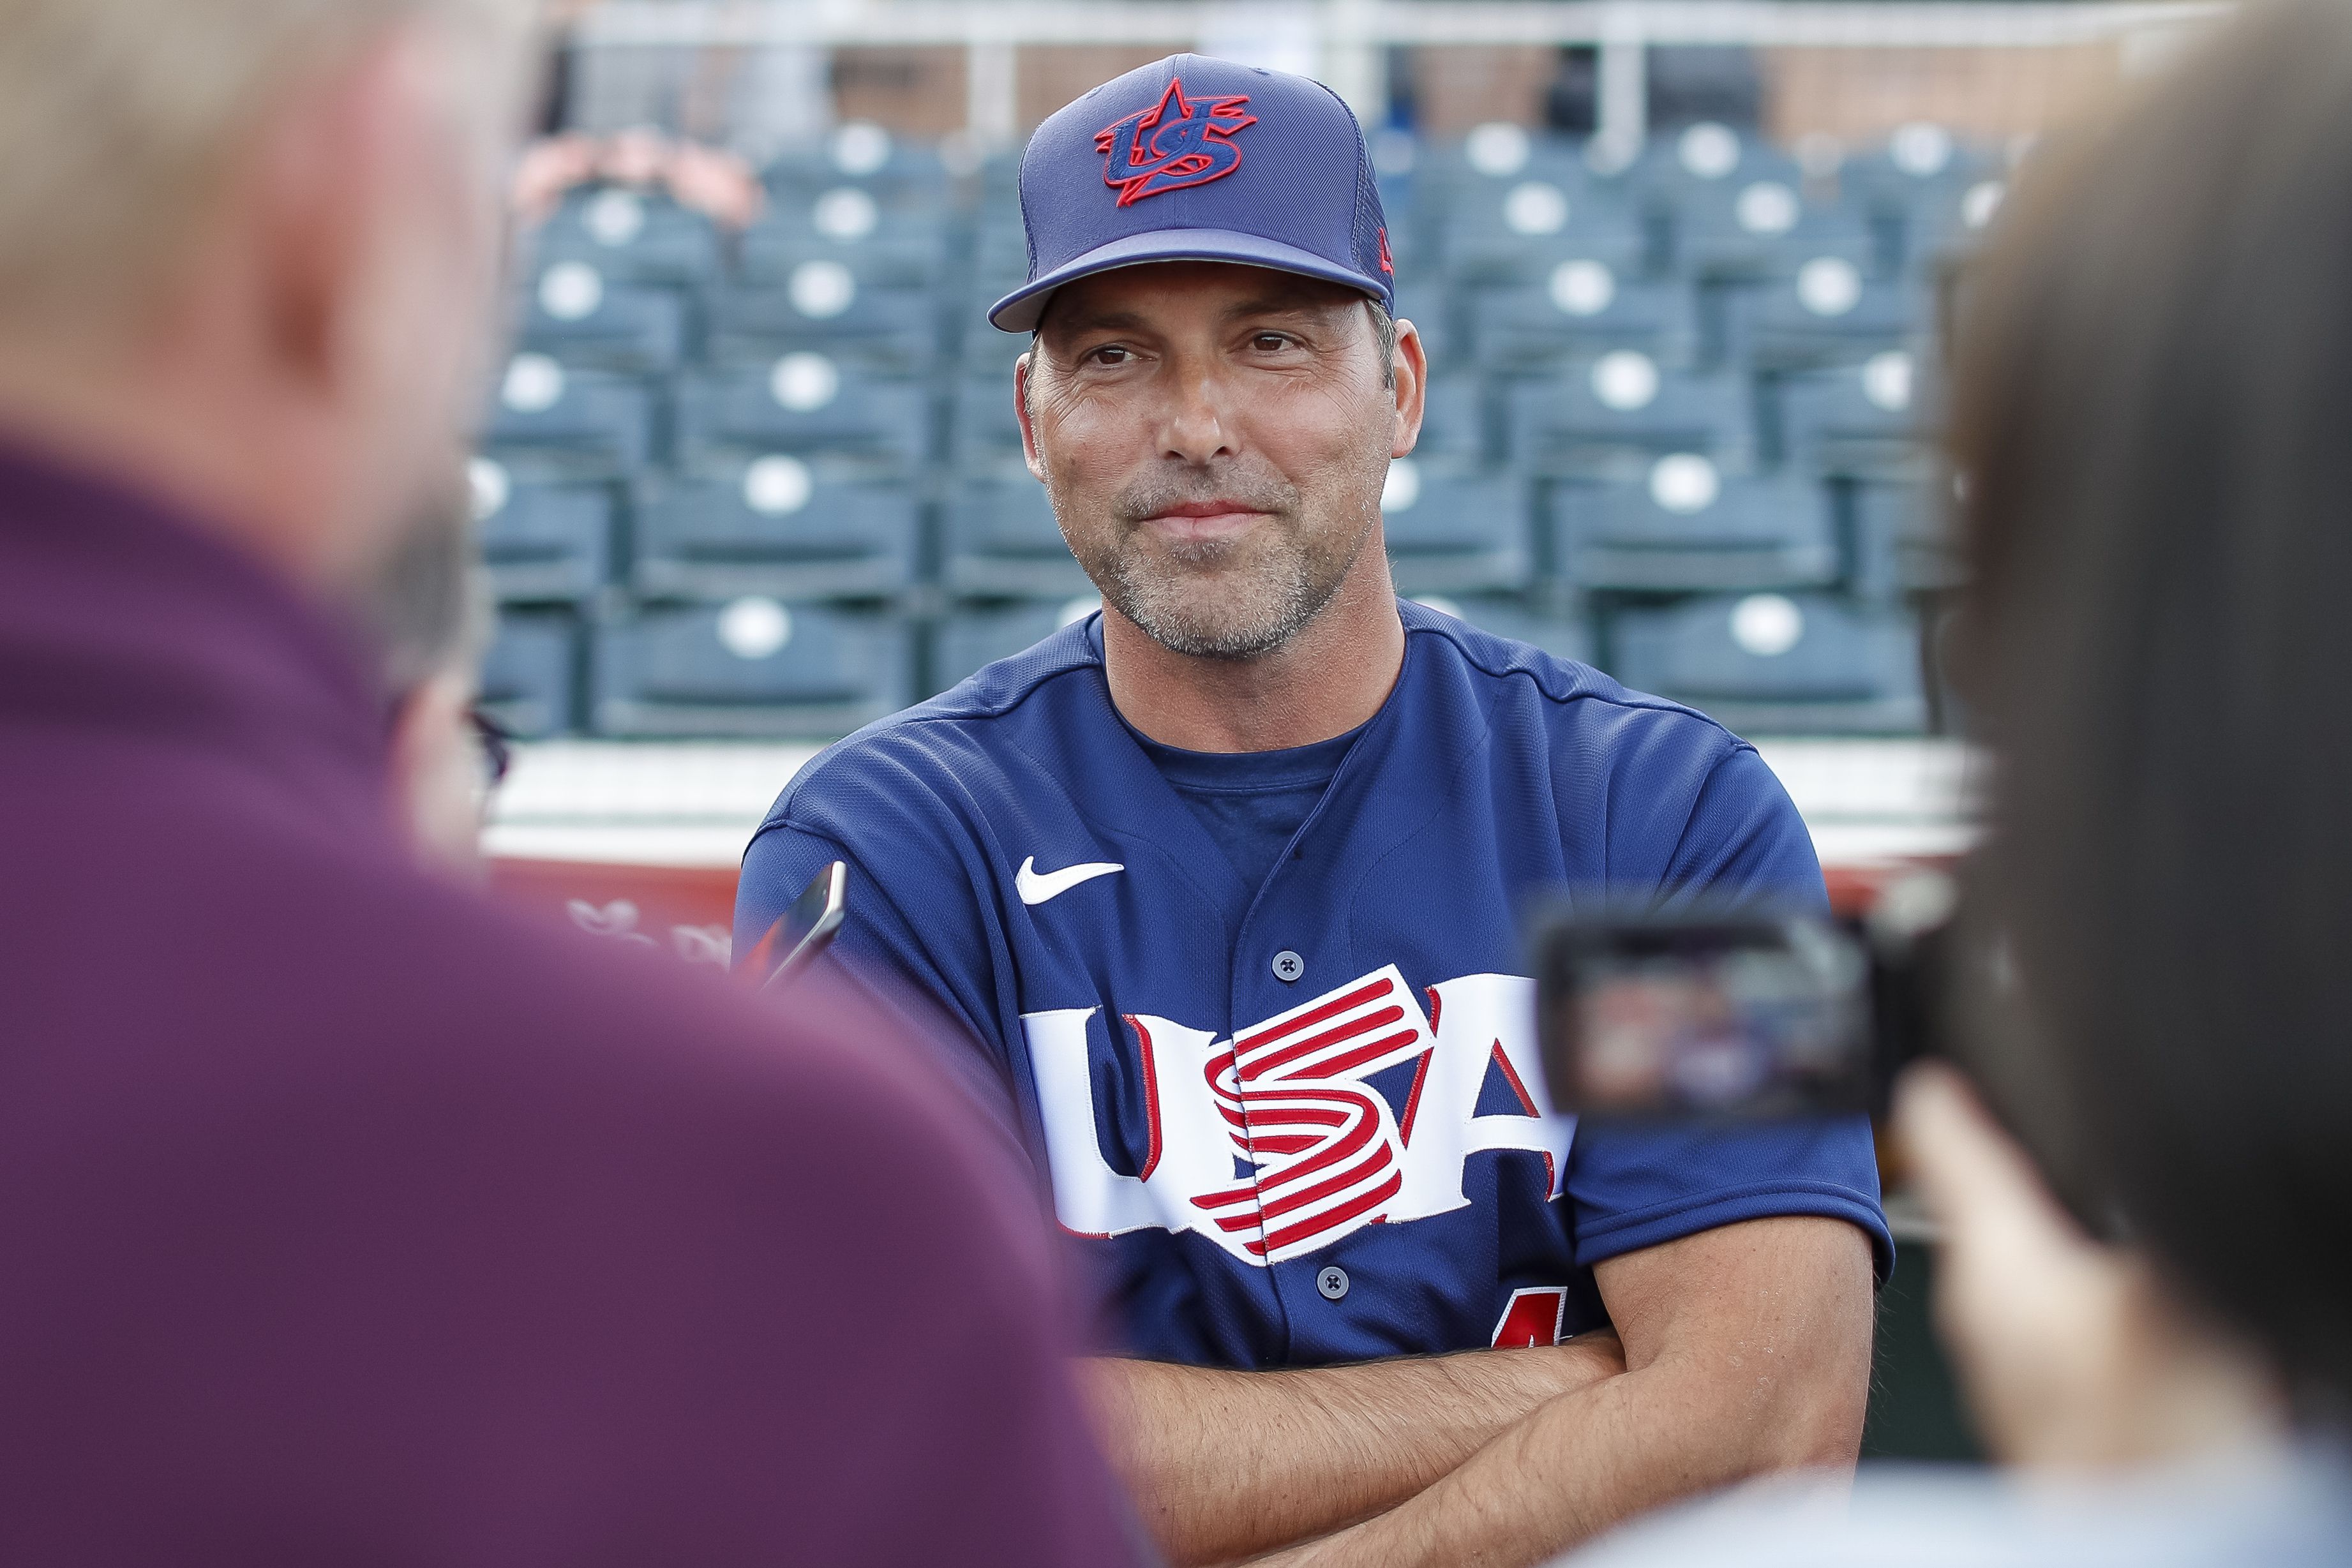 Penn's Mark DeRosa takes on a new challenge: Managing for the first time  with Team USA in the WBC